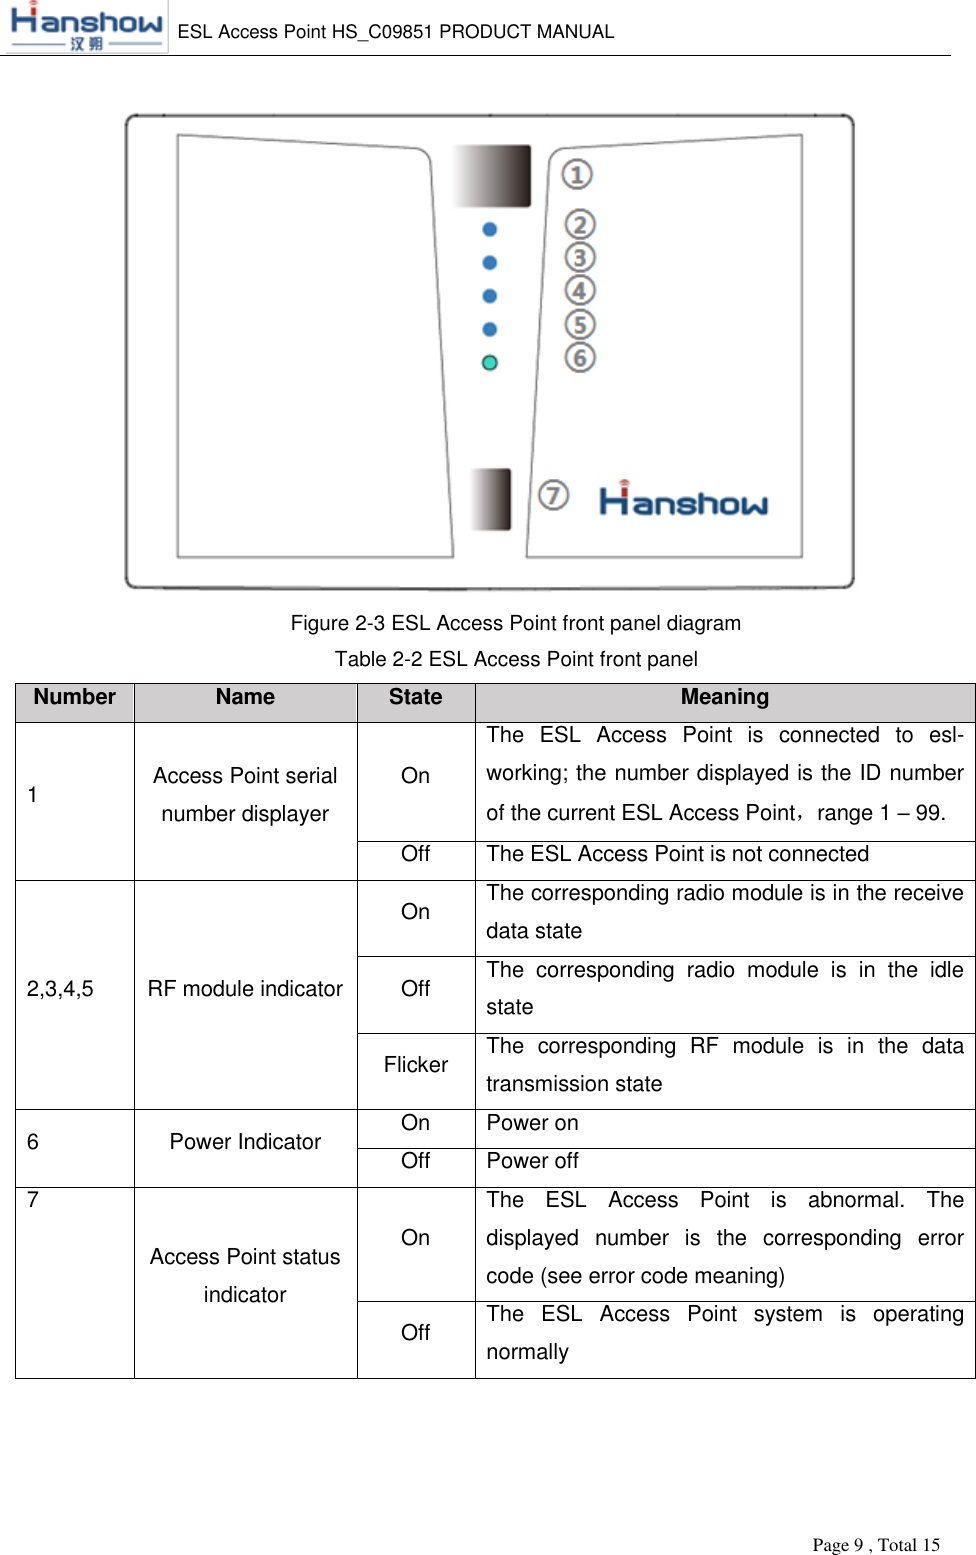    ESL Access Point HS_C09851 PRODUCT MANUAL          Page 9 , Total 15        Figure 2-3 ESL Access Point front panel diagram  Table 2-2 ESL Access Point front panel Number Name State Meaning 1 Access Point serial number displayer On The  ESL  Access  Point  is  connected  to  esl-working; the number displayed is the ID number of the current ESL Access Point，range 1 – 99. Off The ESL Access Point is not connected 2,3,4,5 RF module indicator On The corresponding radio module is in the receive data state Off The  corresponding  radio  module  is  in  the  idle state Flicker The  corresponding  RF  module  is  in  the  data transmission state 6 Power Indicator On Power on Off Power off 7 Access Point status indicator On The  ESL  Access  Point  is  abnormal.  The displayed  number  is  the  corresponding  error code (see error code meaning) Off The  ESL  Access  Point  system  is  operating normally  